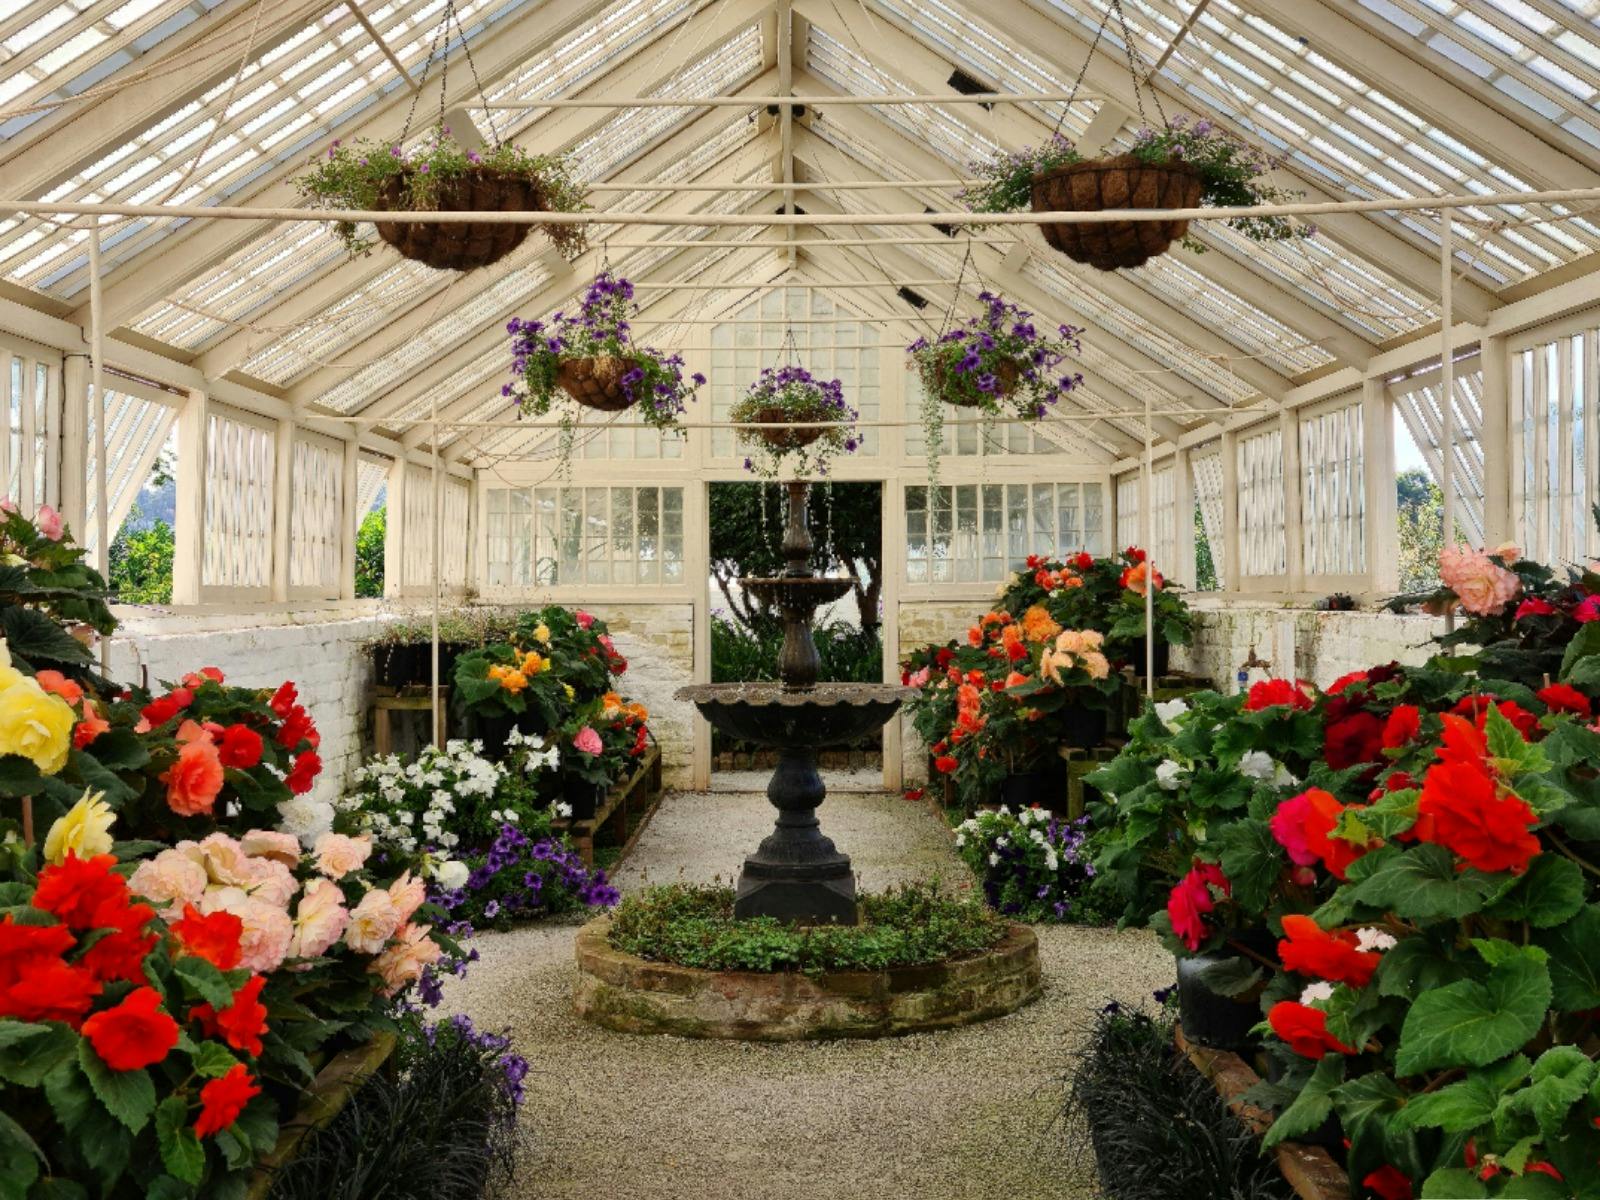 Large glass building with shelves filled with vibrant large flowers